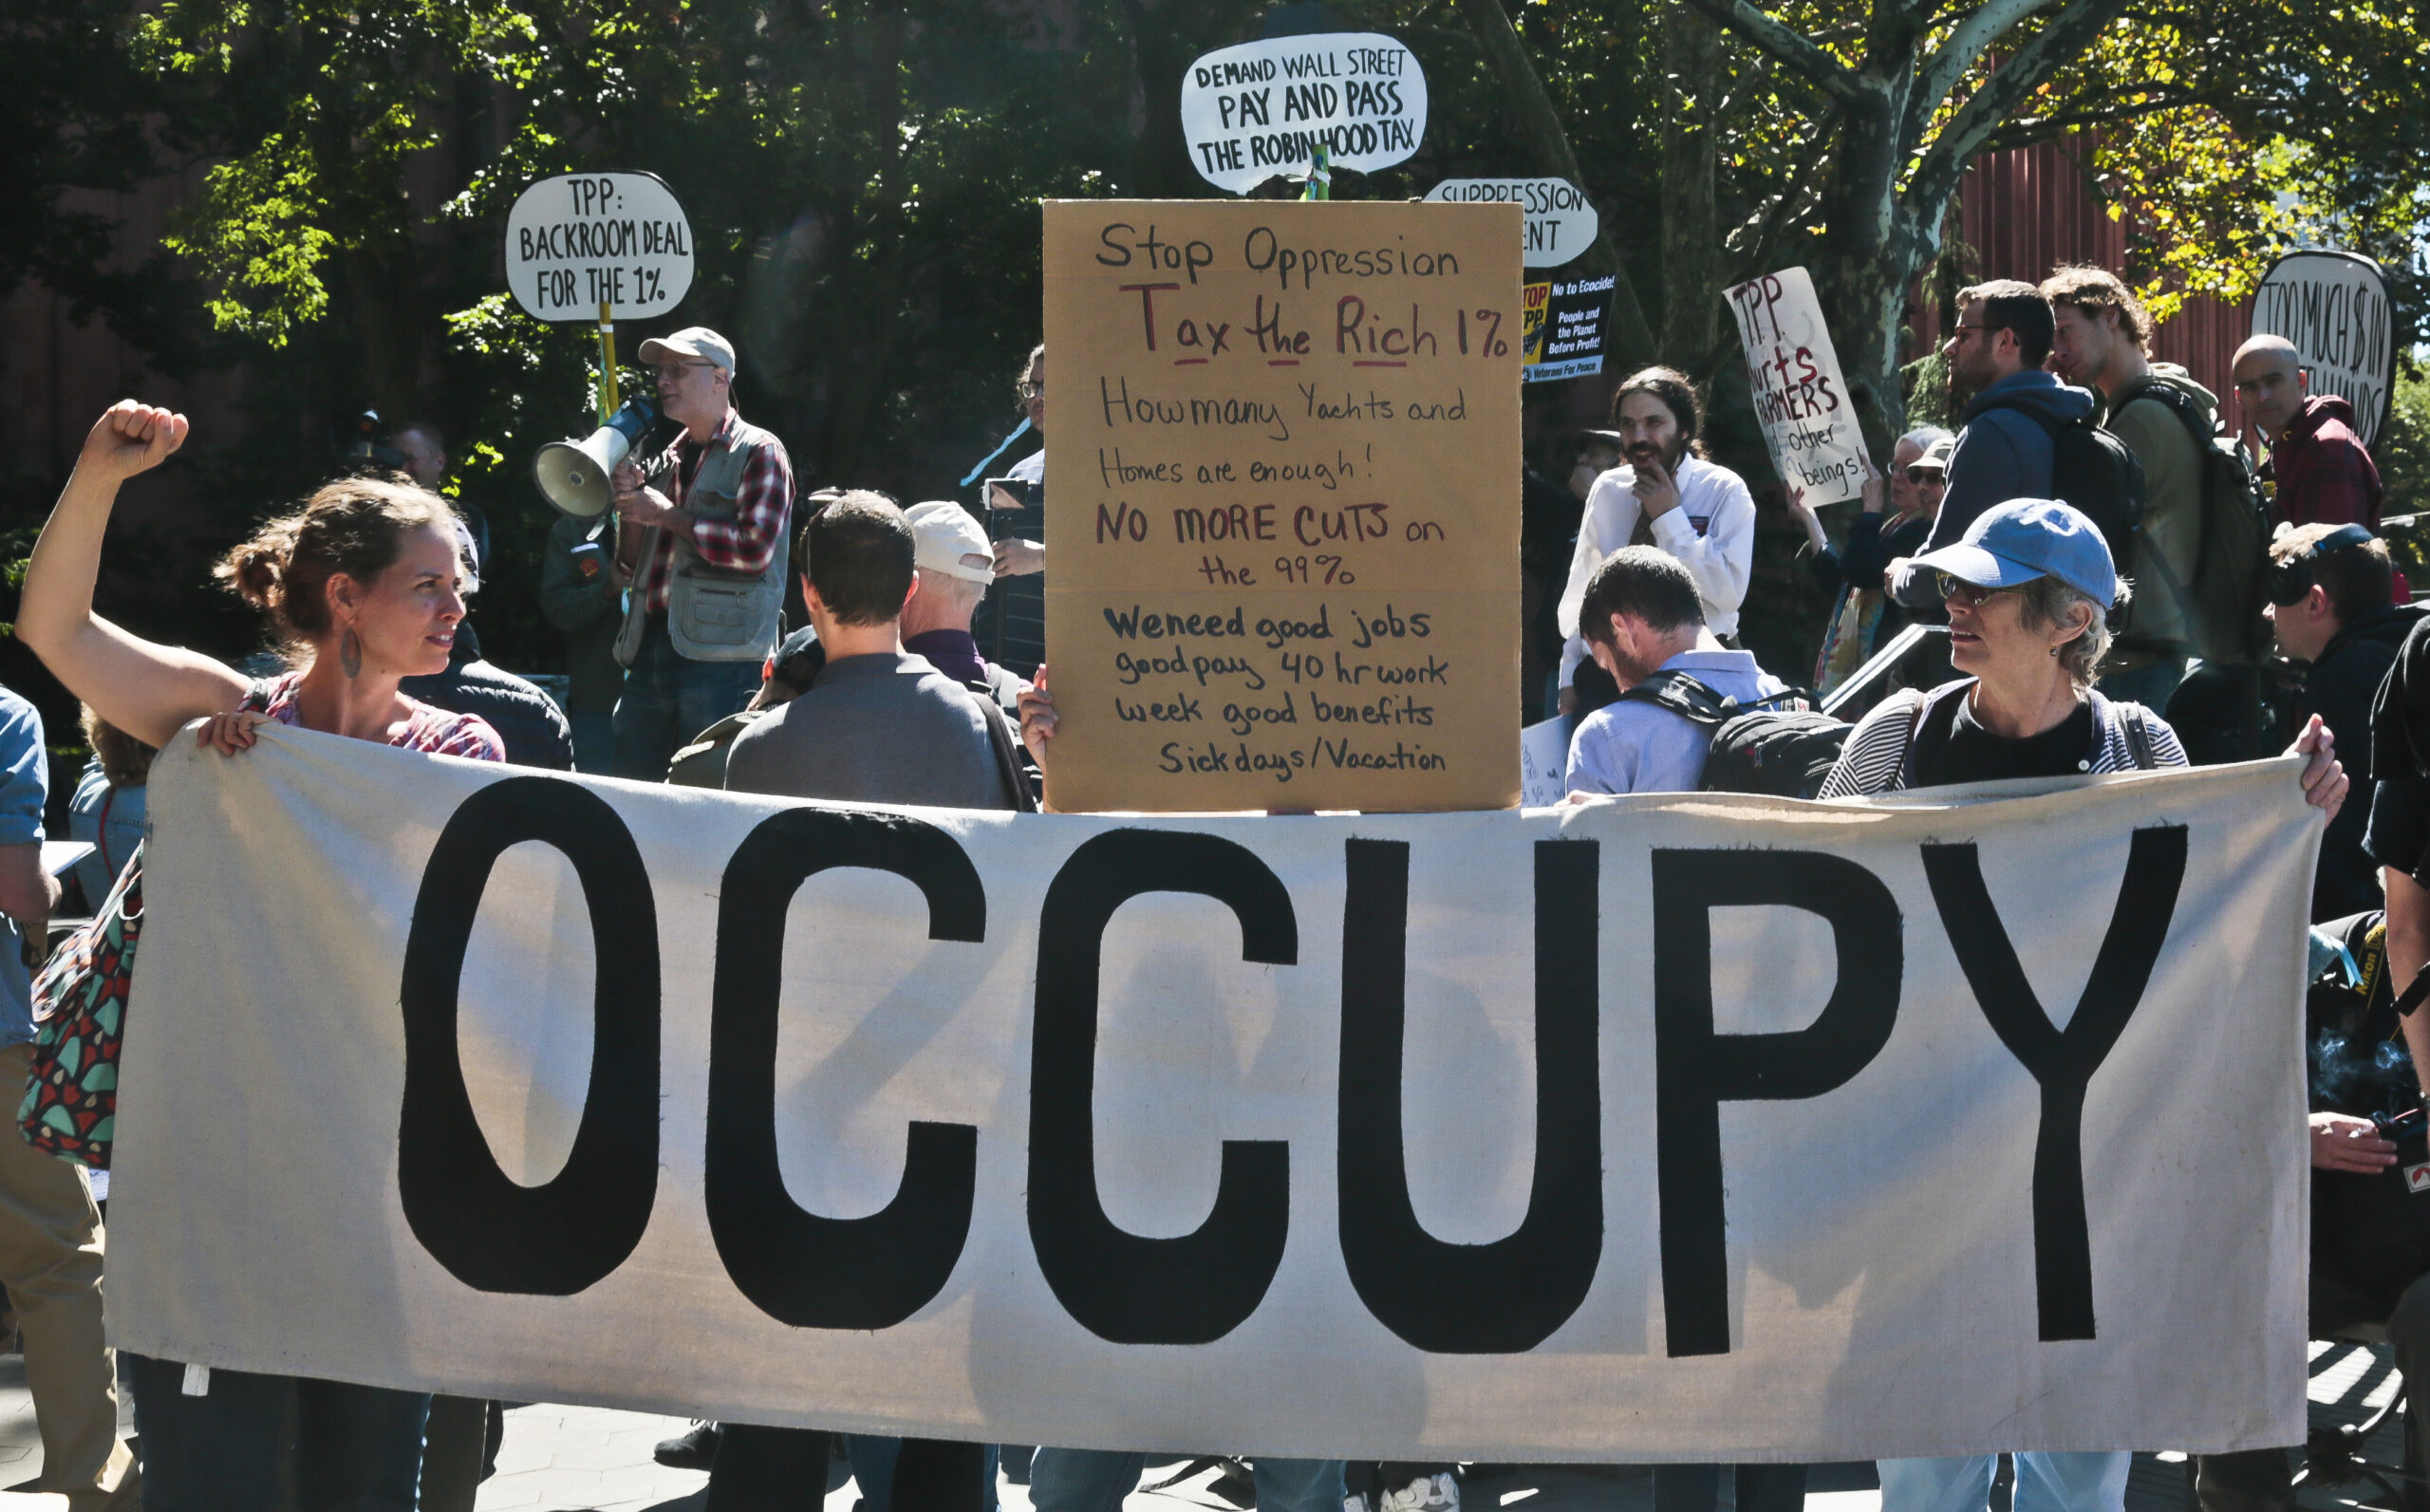 Protesters representing the Occupy Wall Street movement, rally